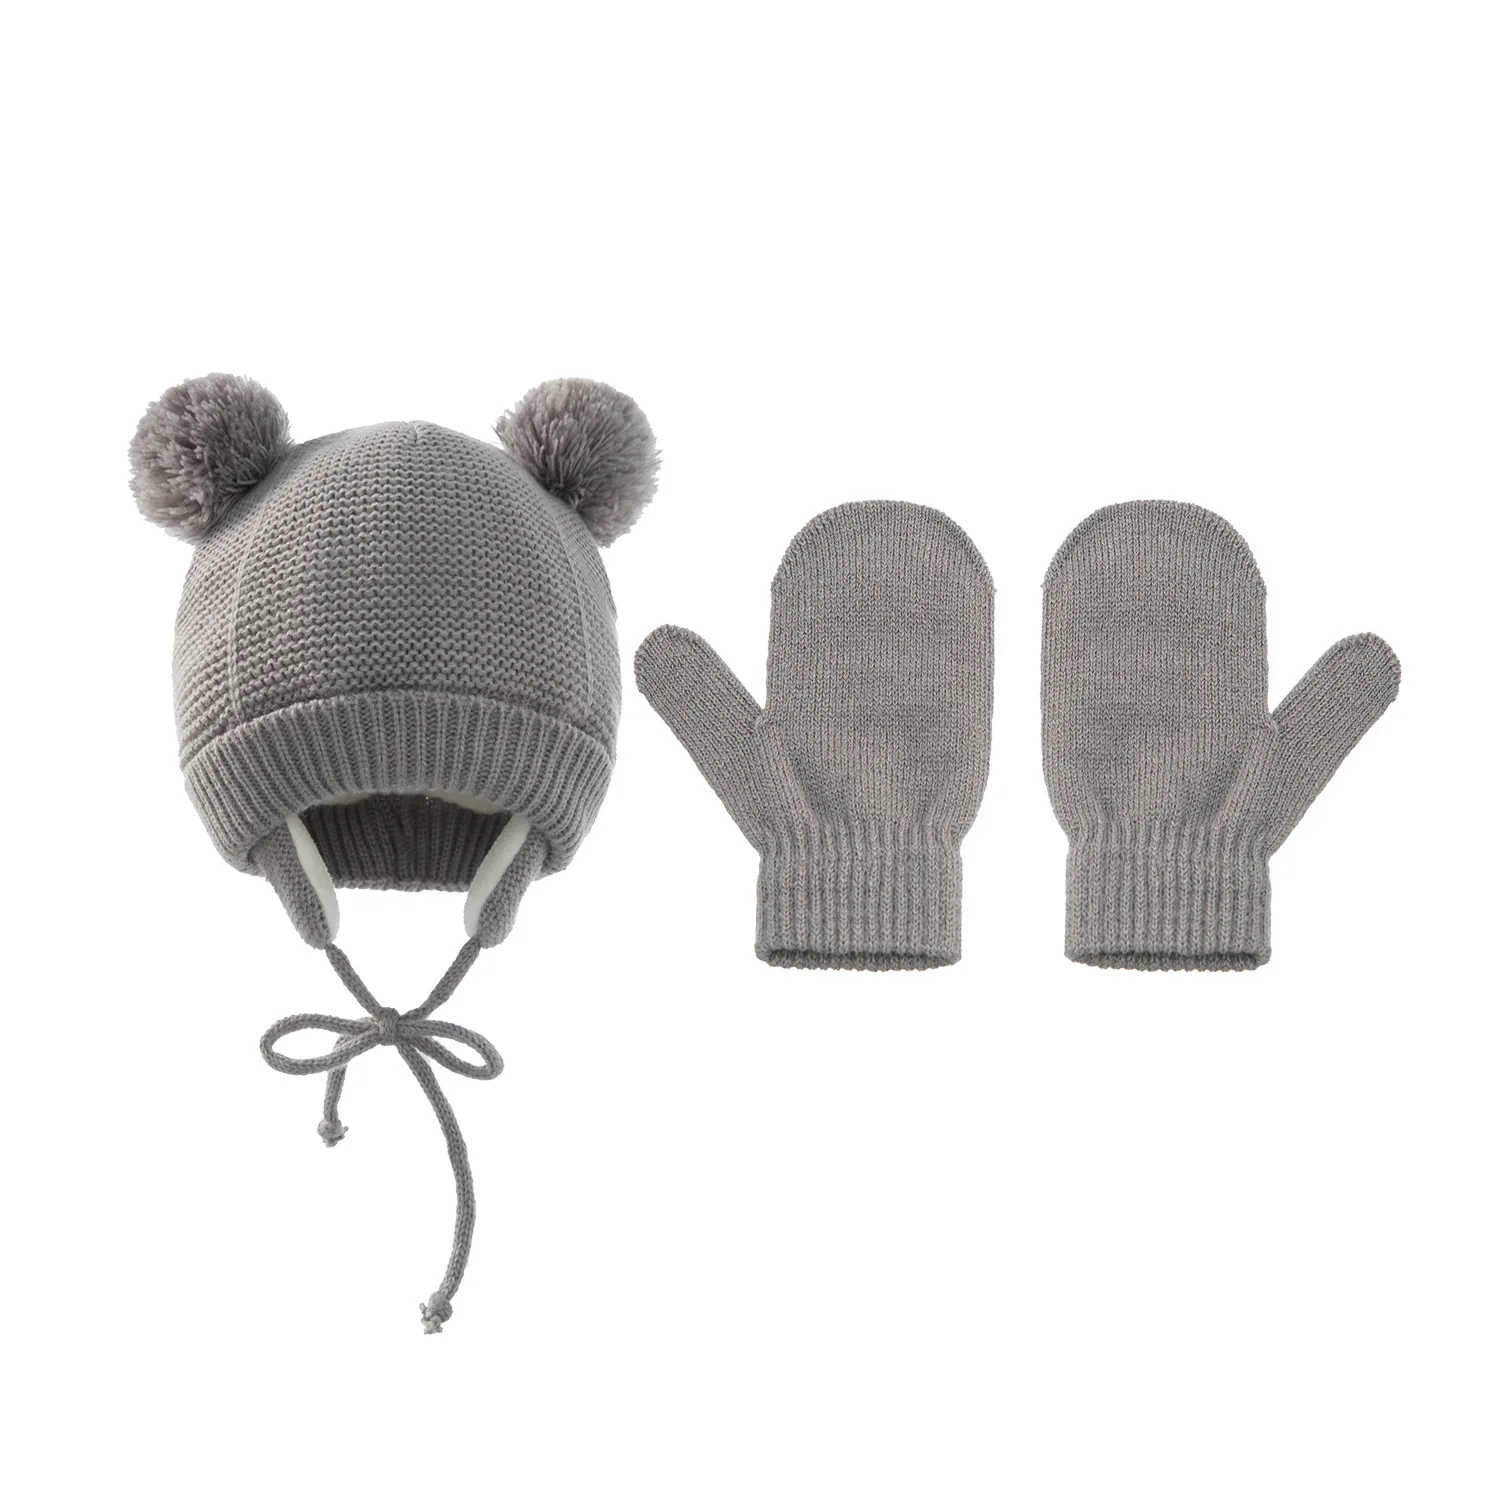 【Binomata】Children's winter hats and gloves two-piece suits baby warm wool knitted hat gloves enlarge